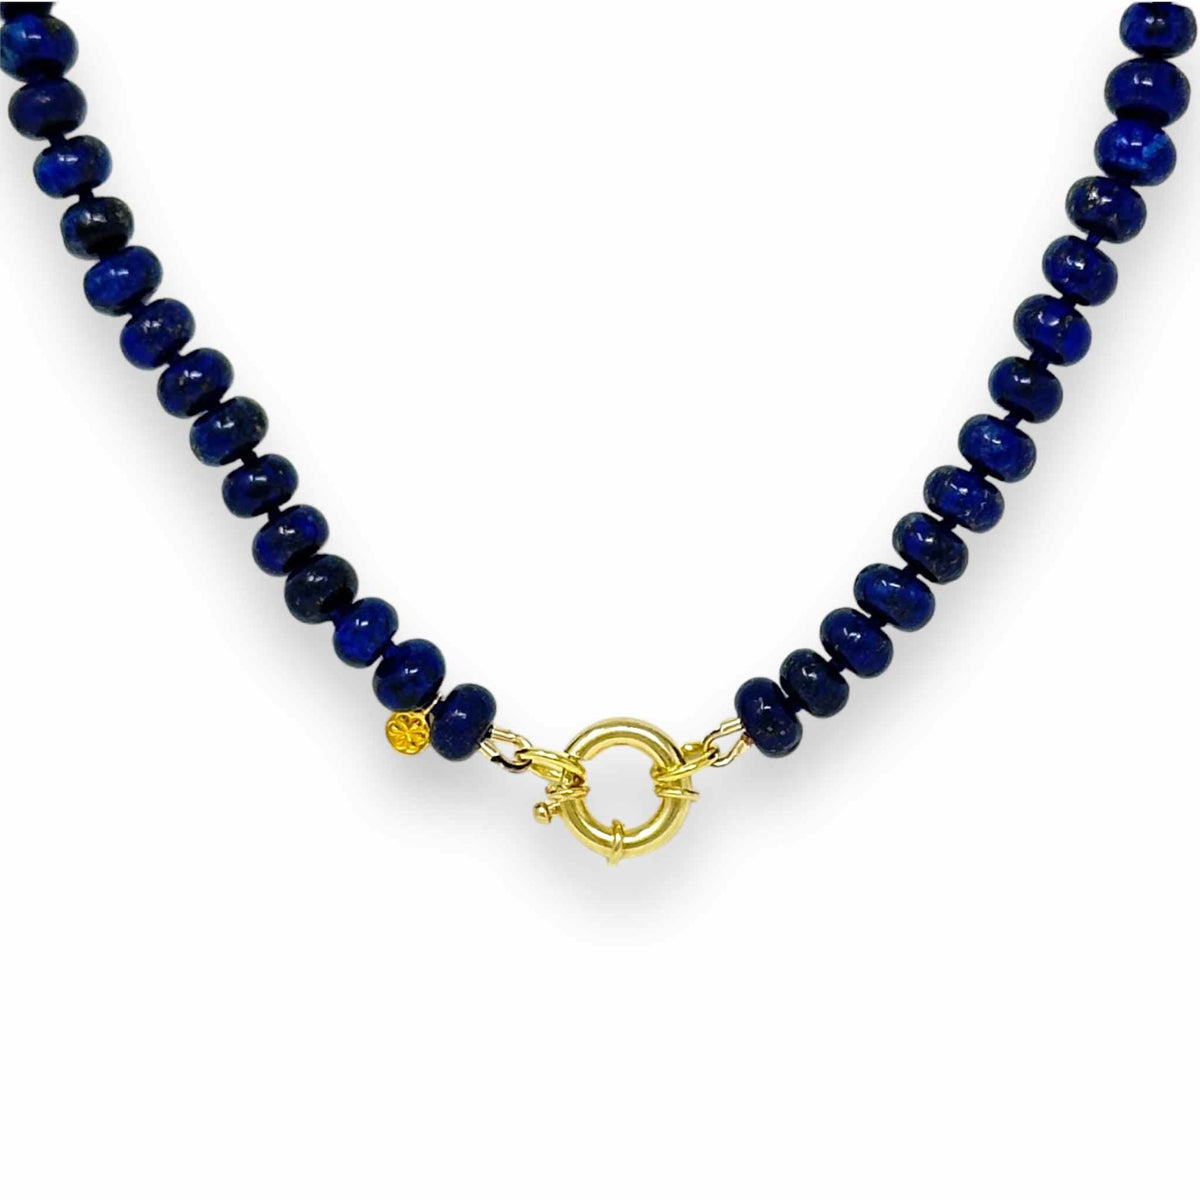 Lapis Lazuli necklace beaded zoomed in on clasp